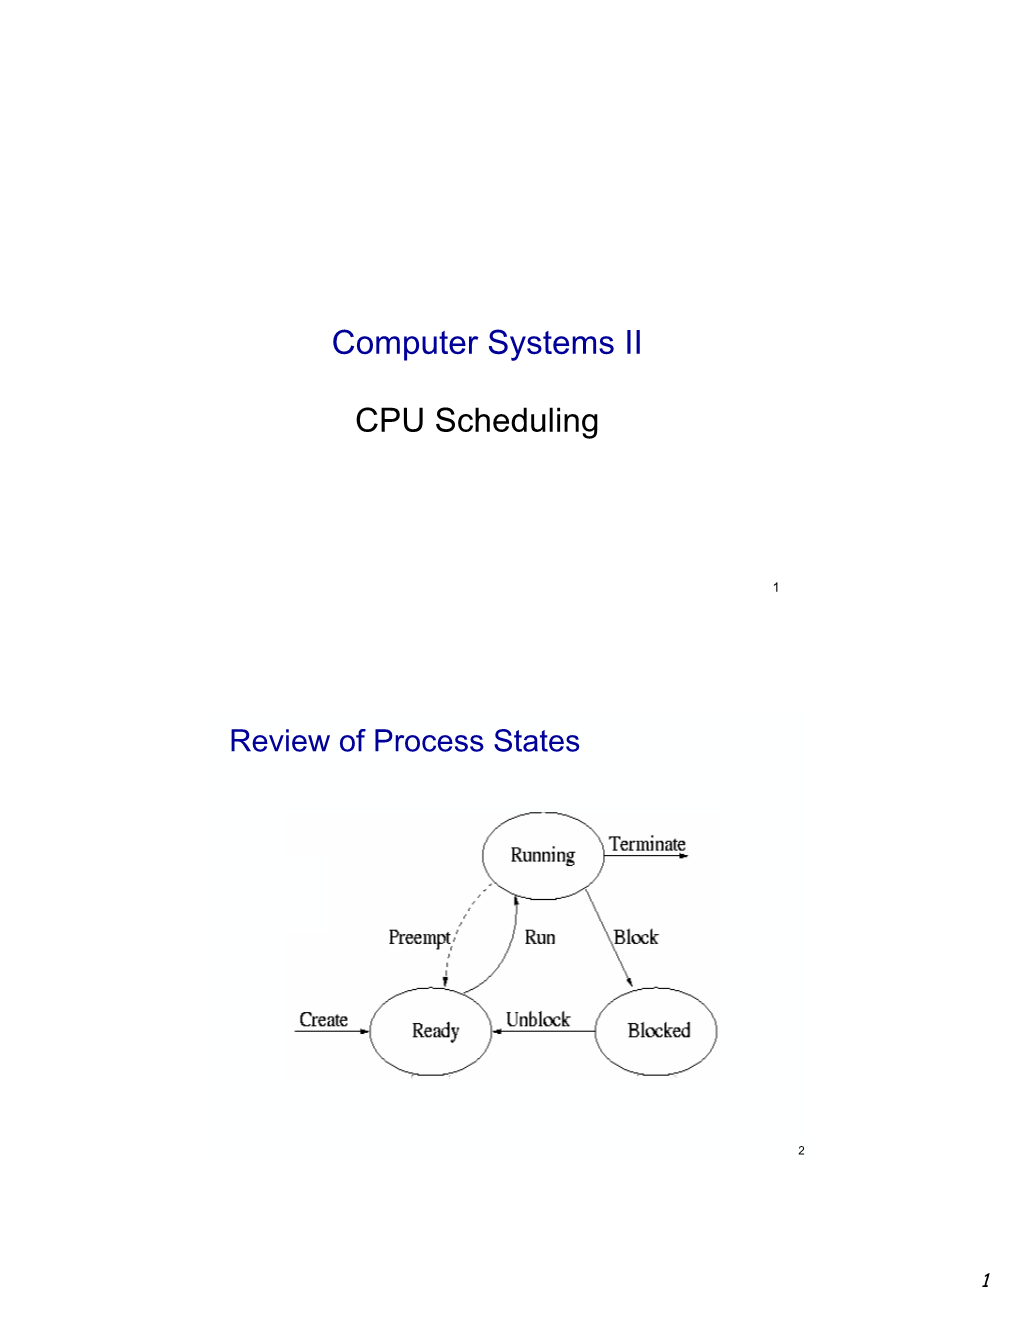 Computer Systems II CPU Scheduling